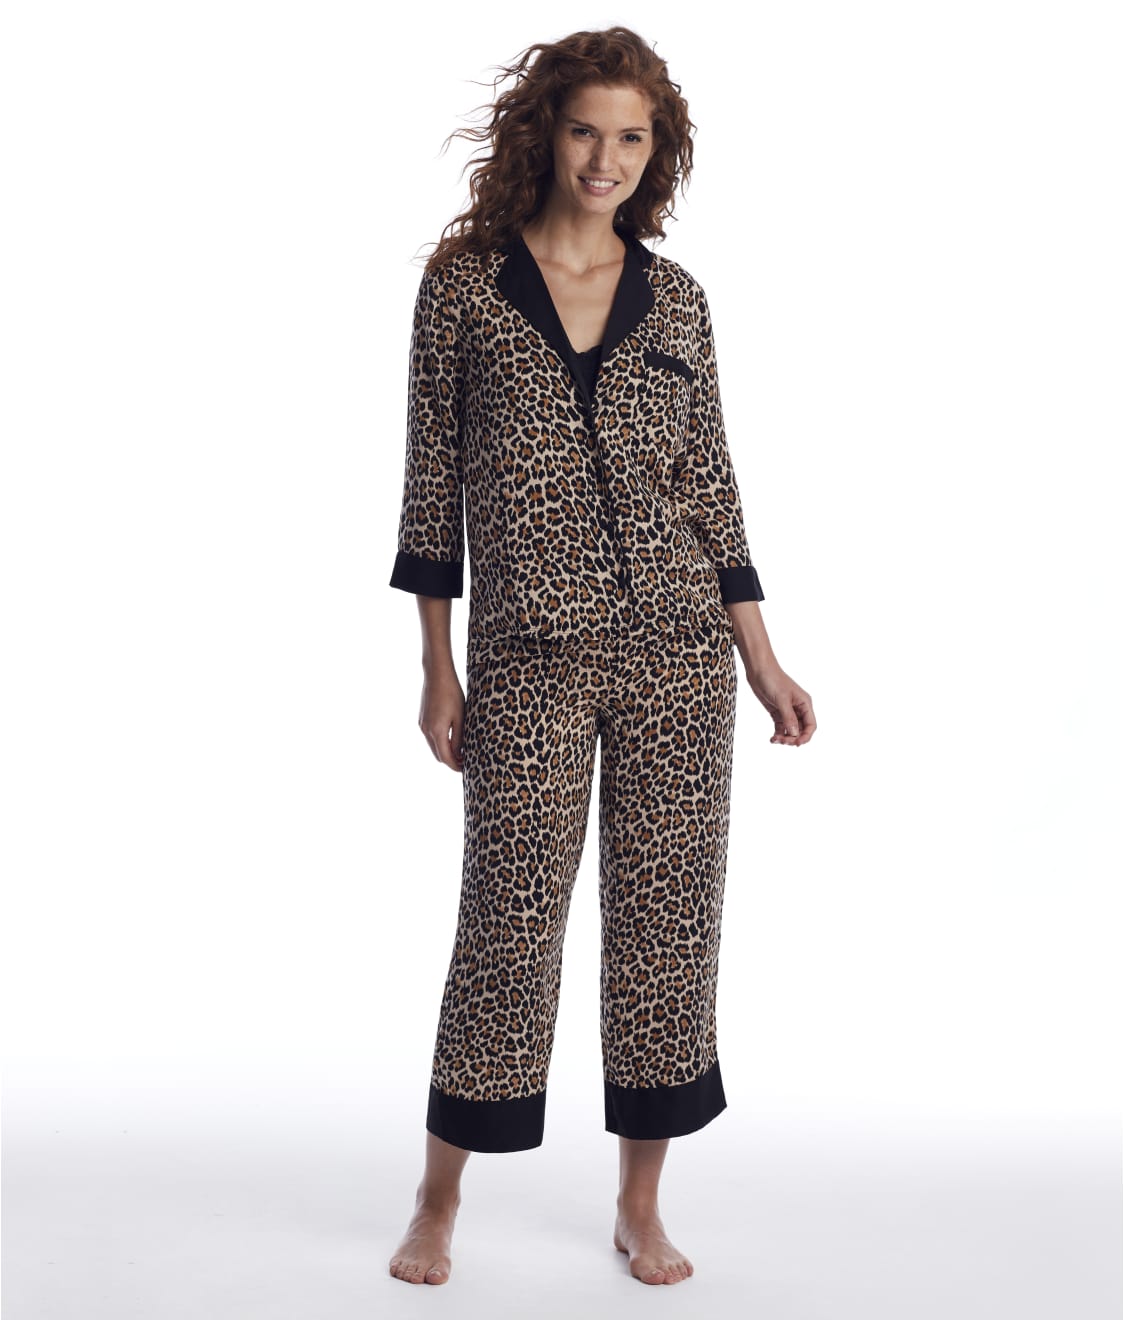 kate spade new york Leopard Cropped Woven Pajama Set & Reviews | Bare  Necessities (Style KS92020-LEOP)